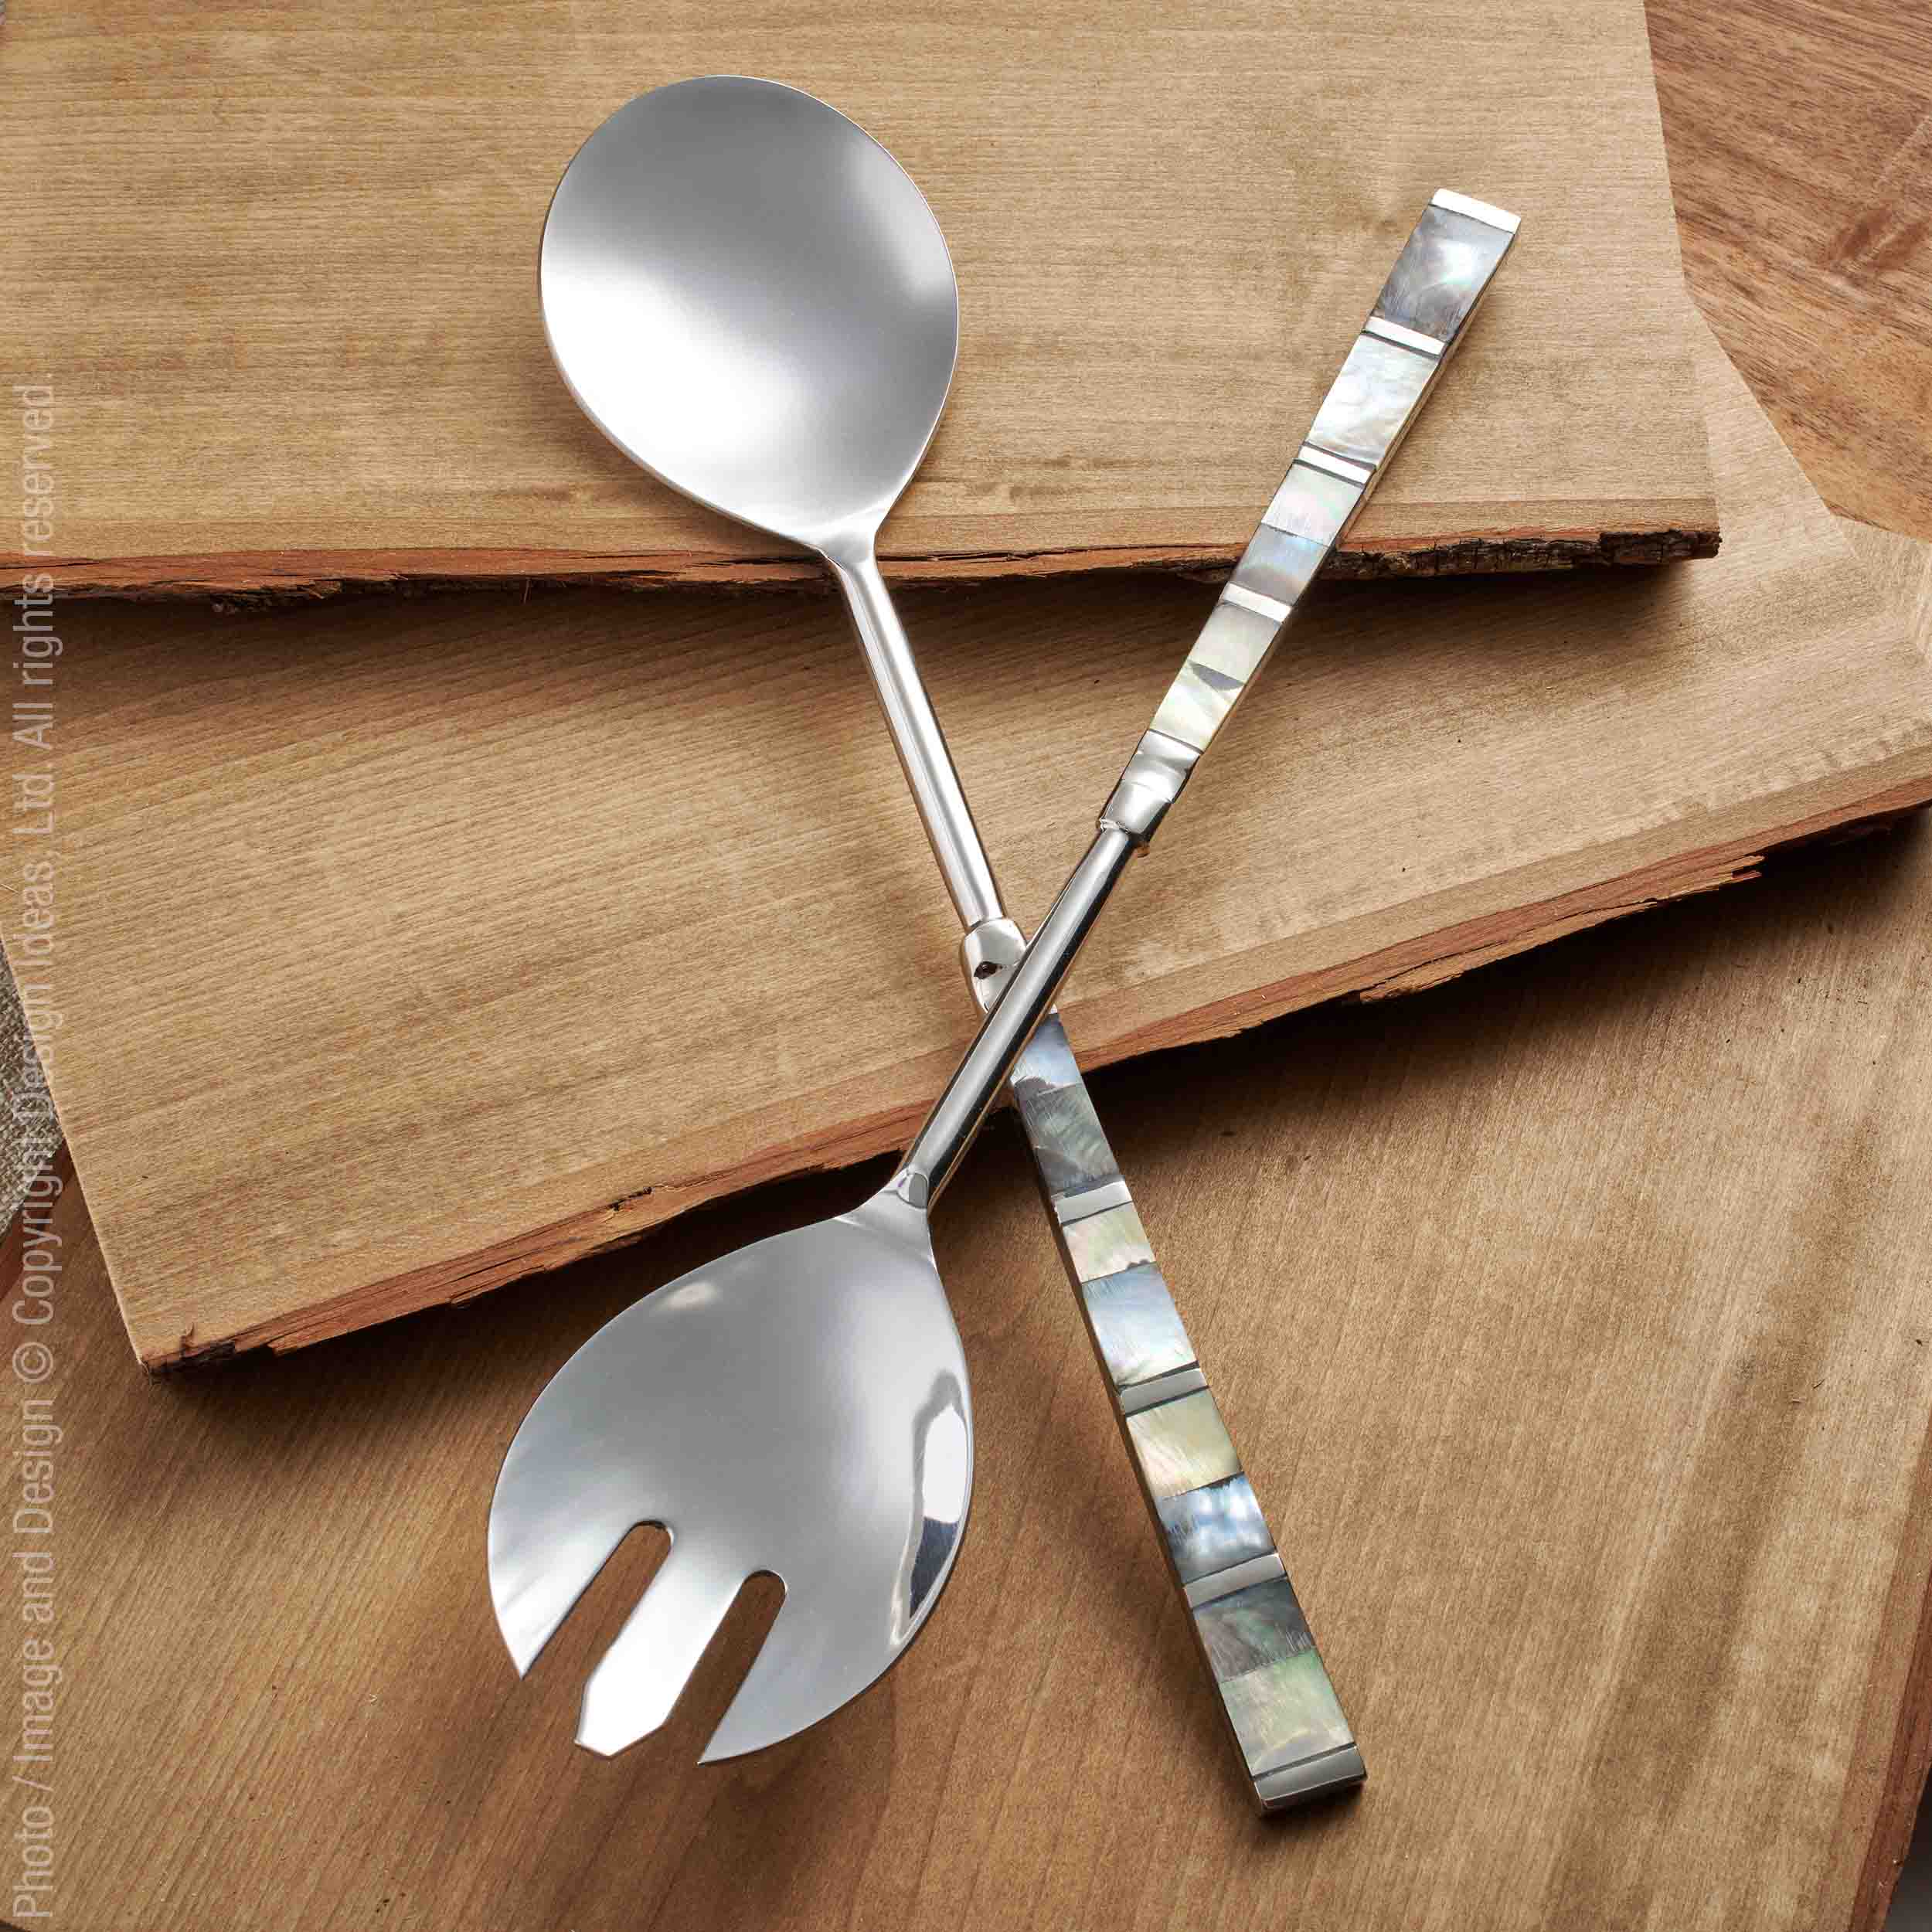 Abalon™ salad servers - Silver | Image 1 | Premium Utensils from the Abalon collection | made with Stainless Steel for long lasting use | texxture